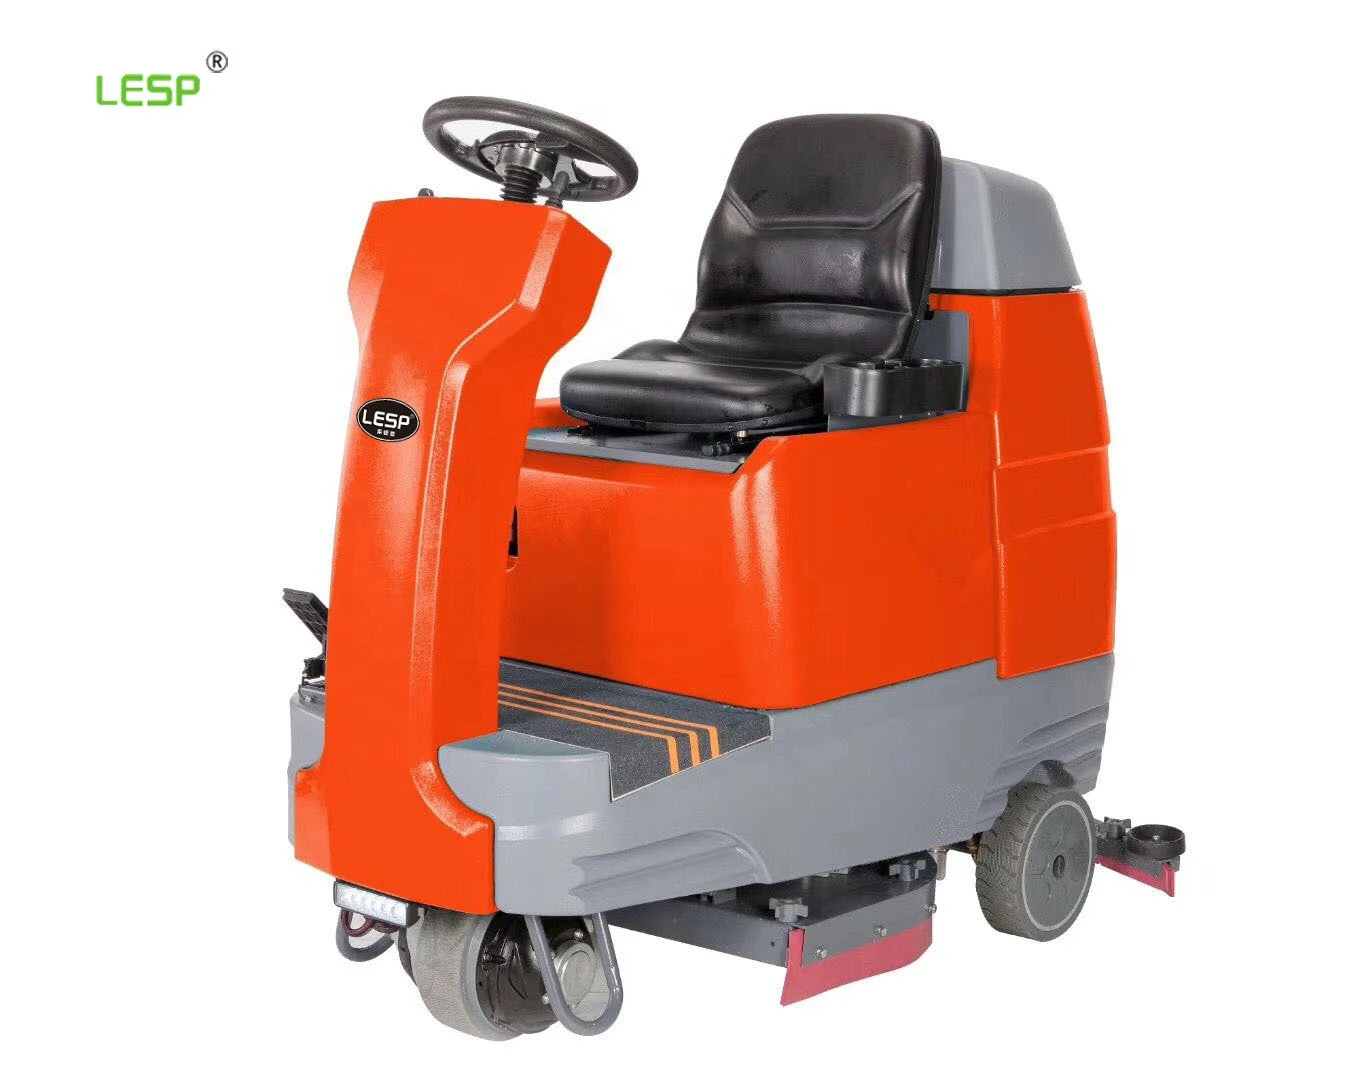 New carpet cleaning machines Jh-860 industrial+ultrasonic+cleaner floor sweeper